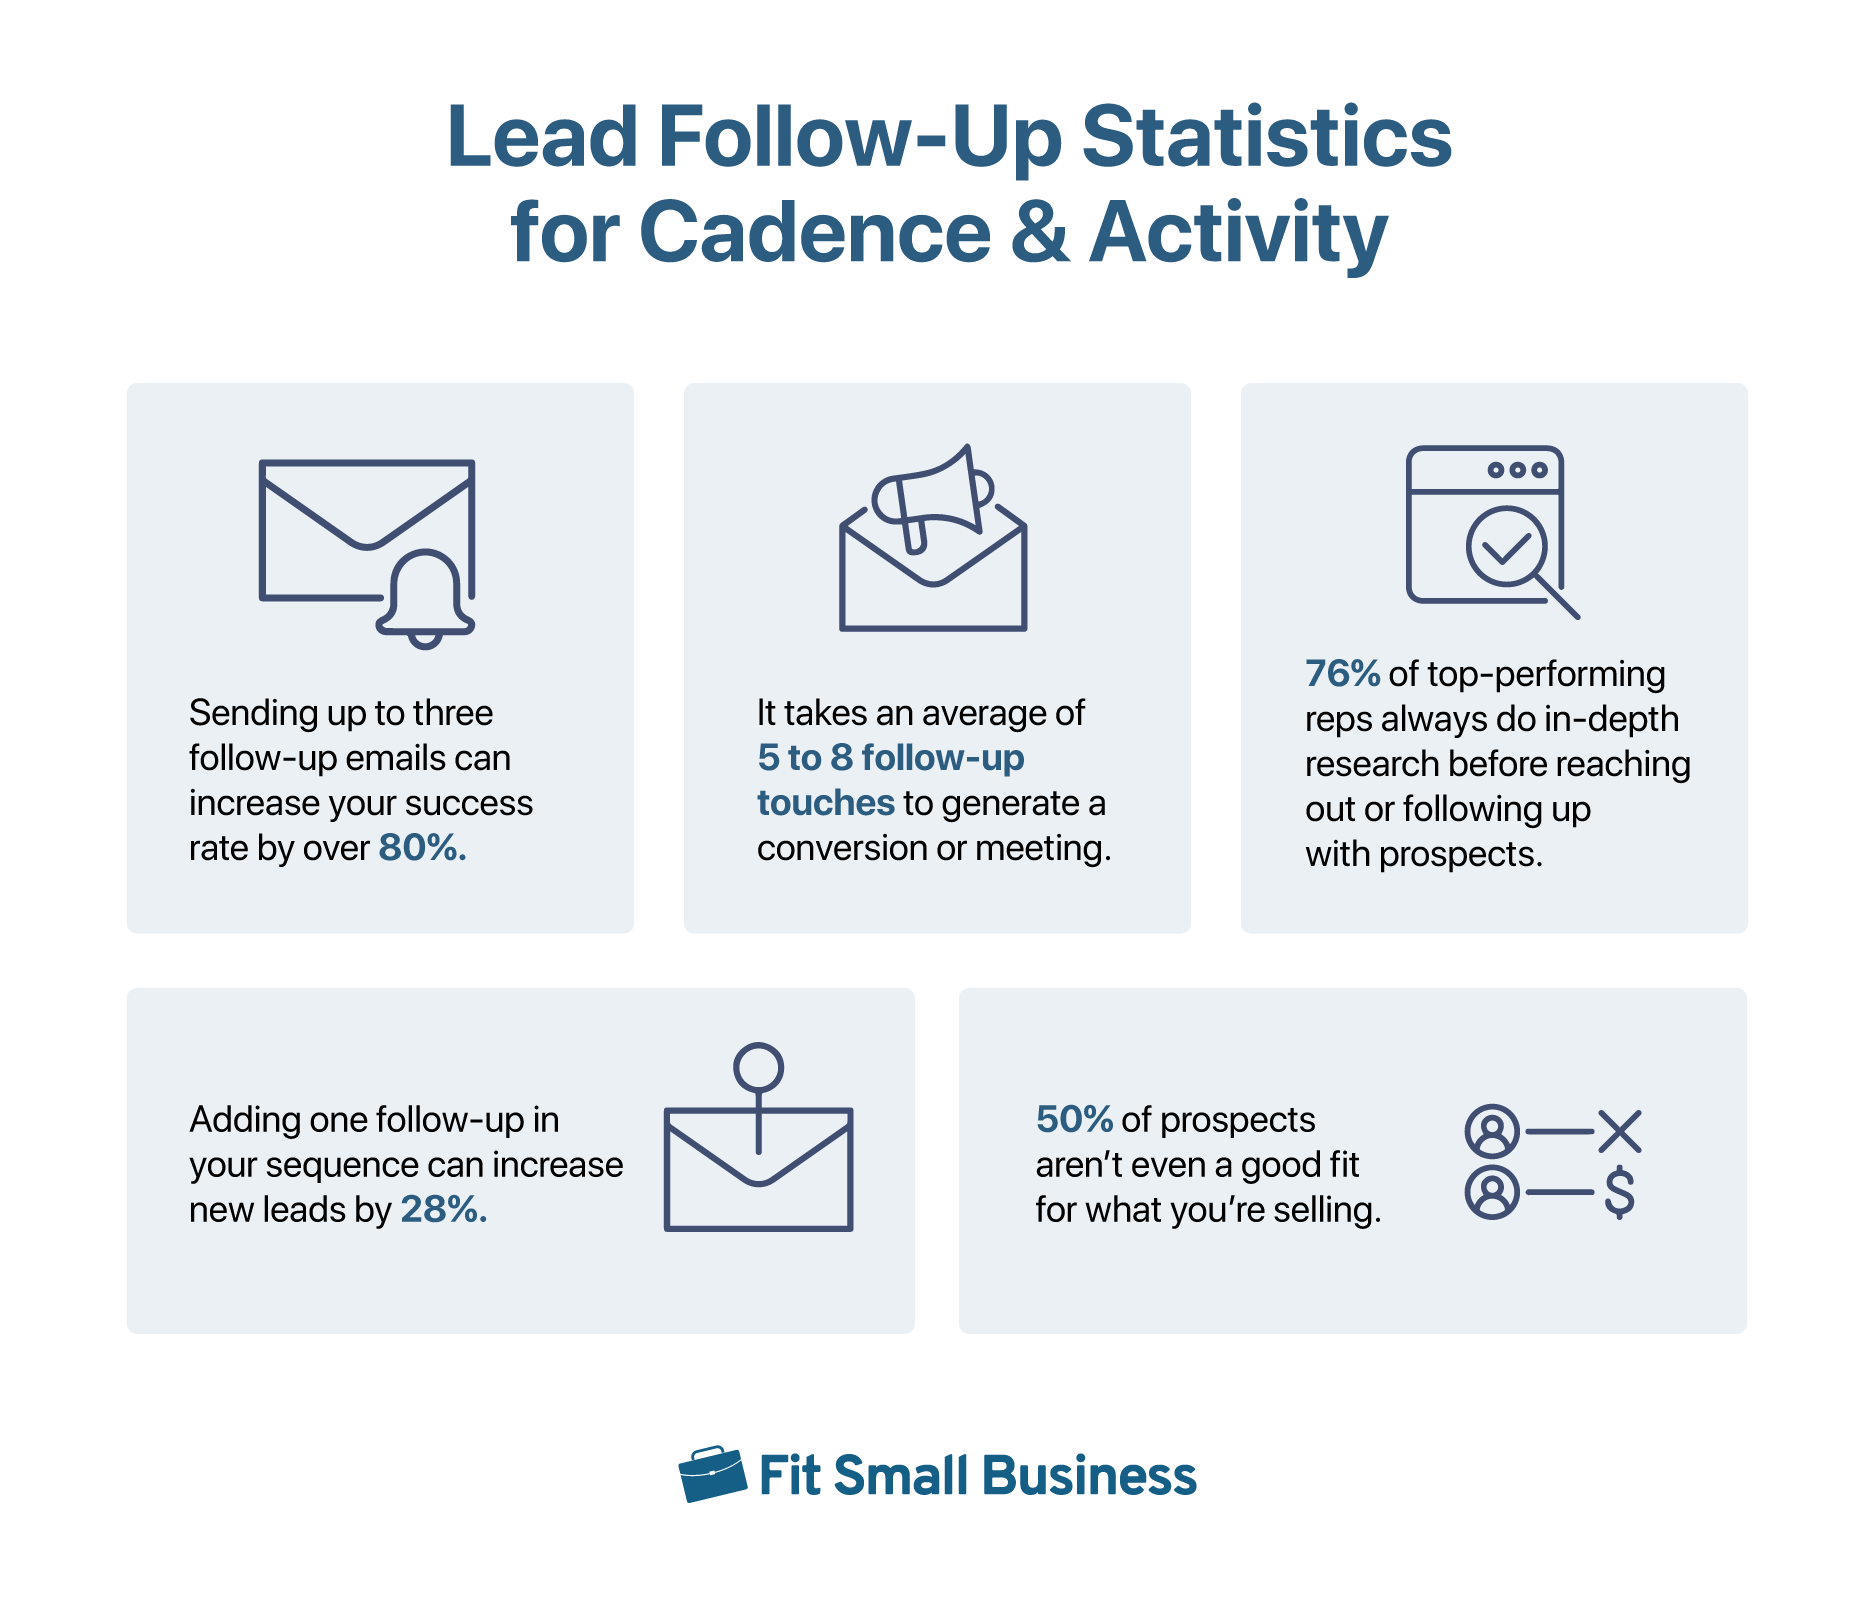 A graph of lead follow-up statistics for cadence and activity